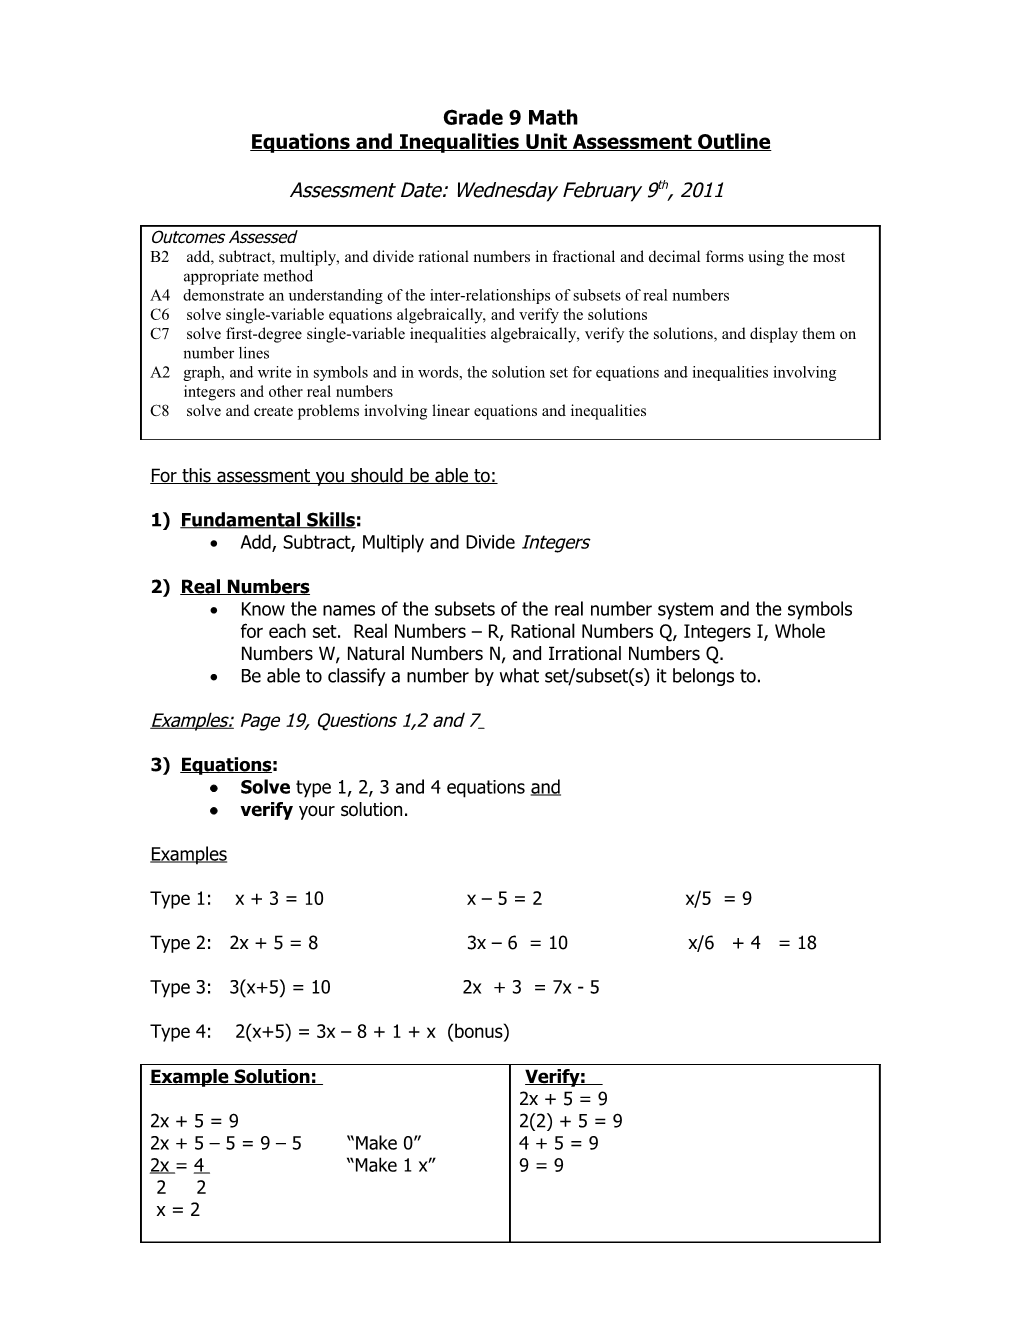 Equations and Inequalities Unit Assessment Outline